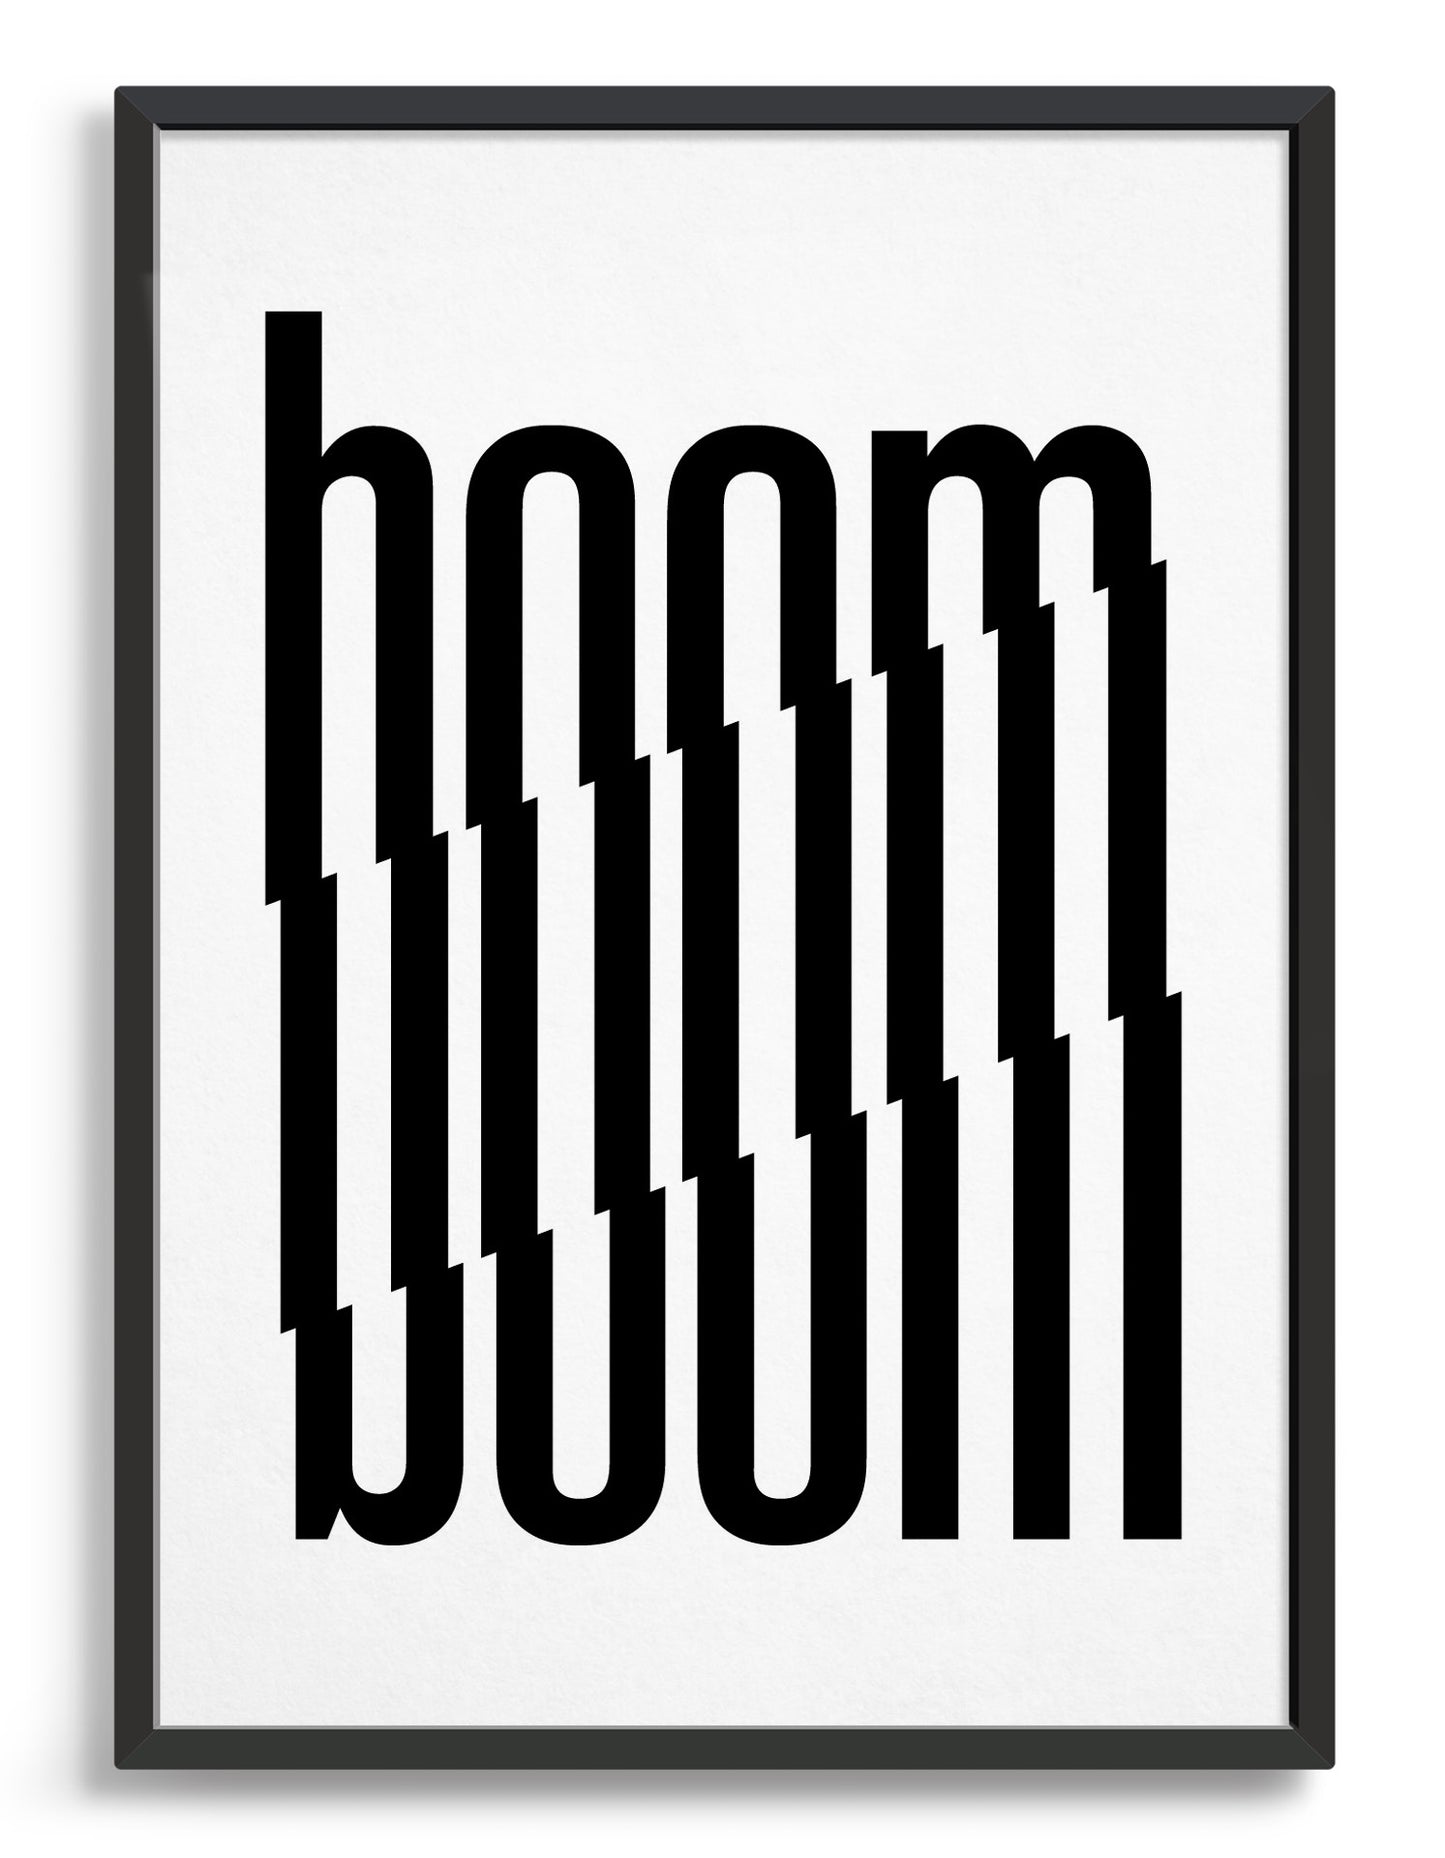 Framed typography art print of the word boom in black text against a white background